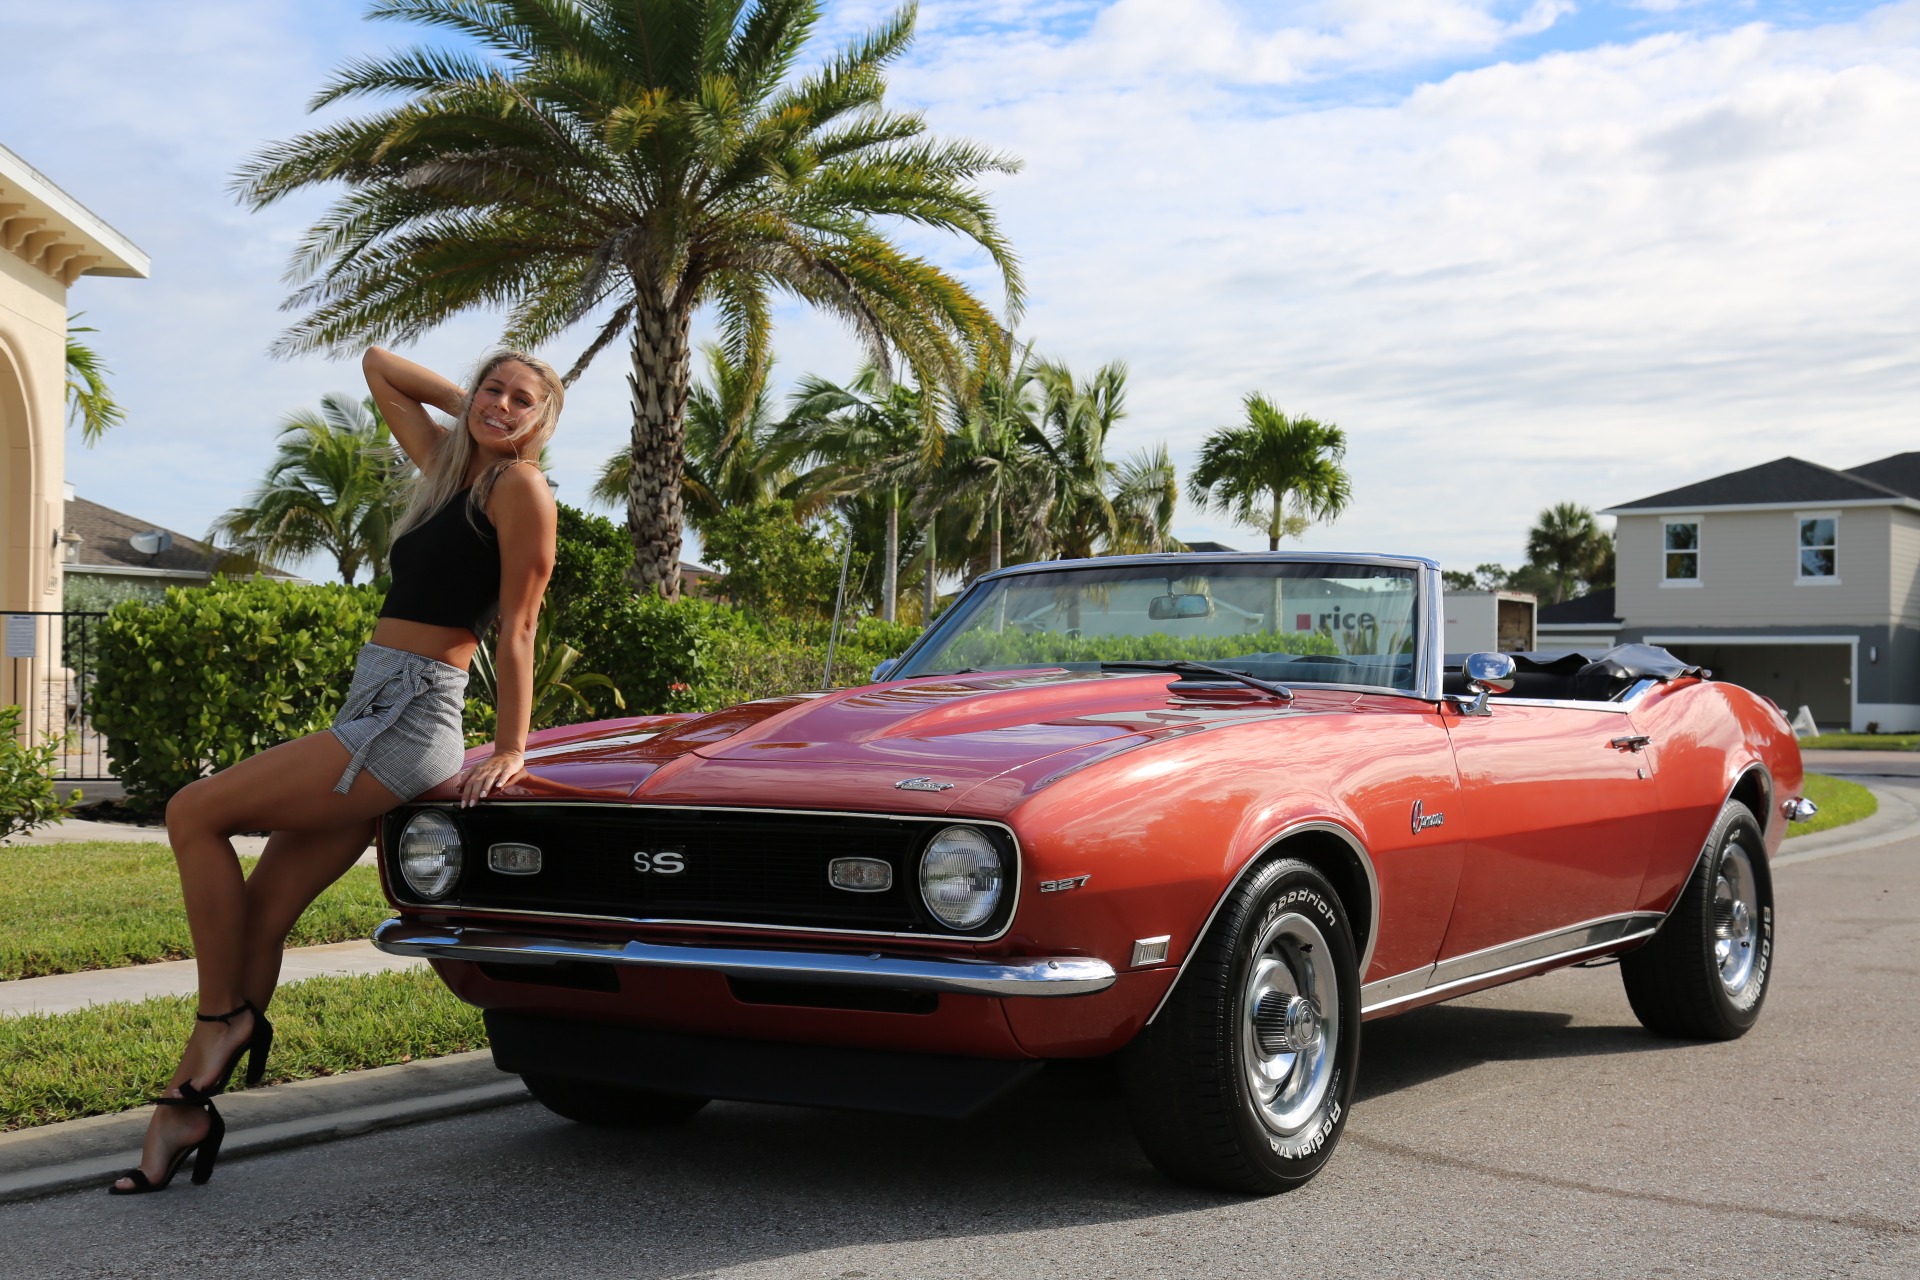 Used 1968 Chevy Camaro Convertible V8 Auto for sale Sold at Muscle Cars for Sale Inc. in Fort Myers FL 33912 4